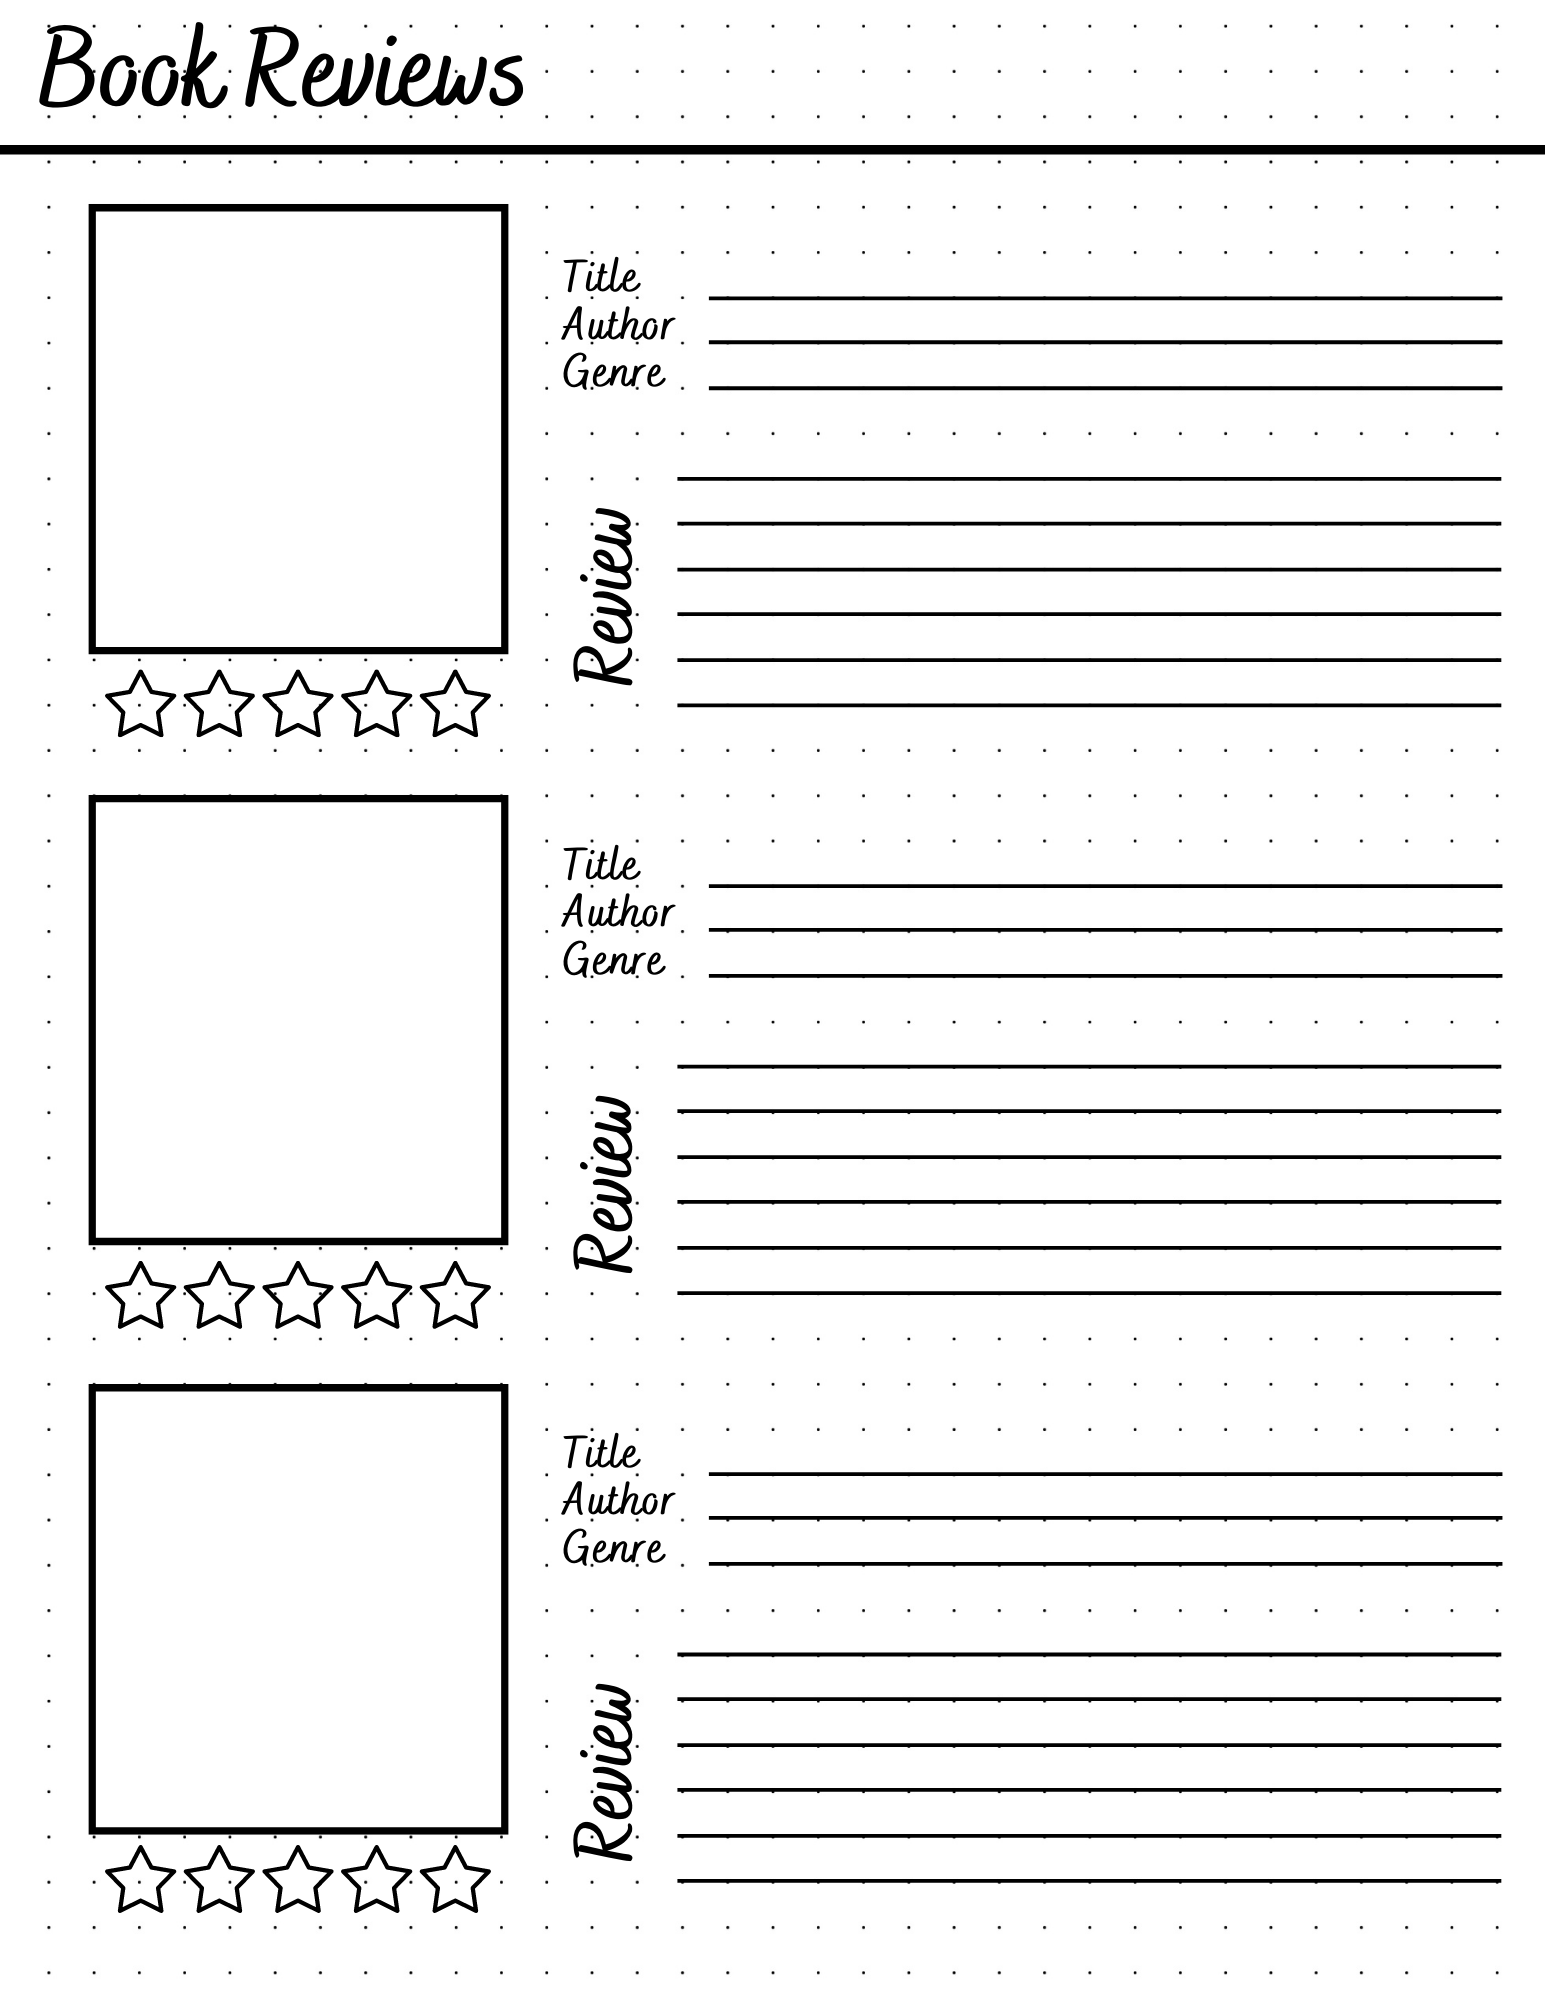 monthly-reading-log-calendars-2021-2022-school-year-tpt-monthly